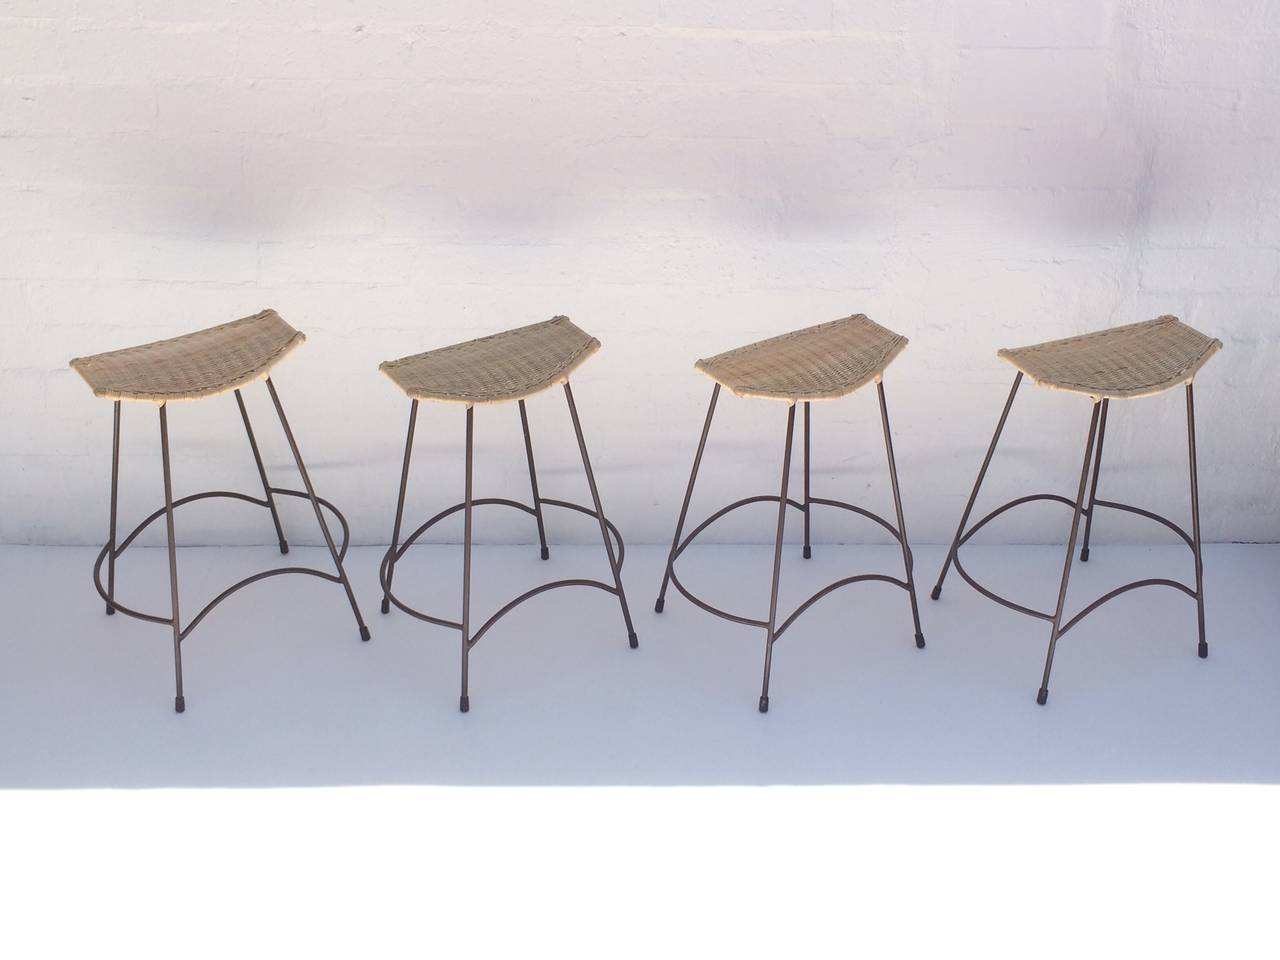 American Set of Four Wicker and Painted Steel Stools Designed by Arthur Umanoff